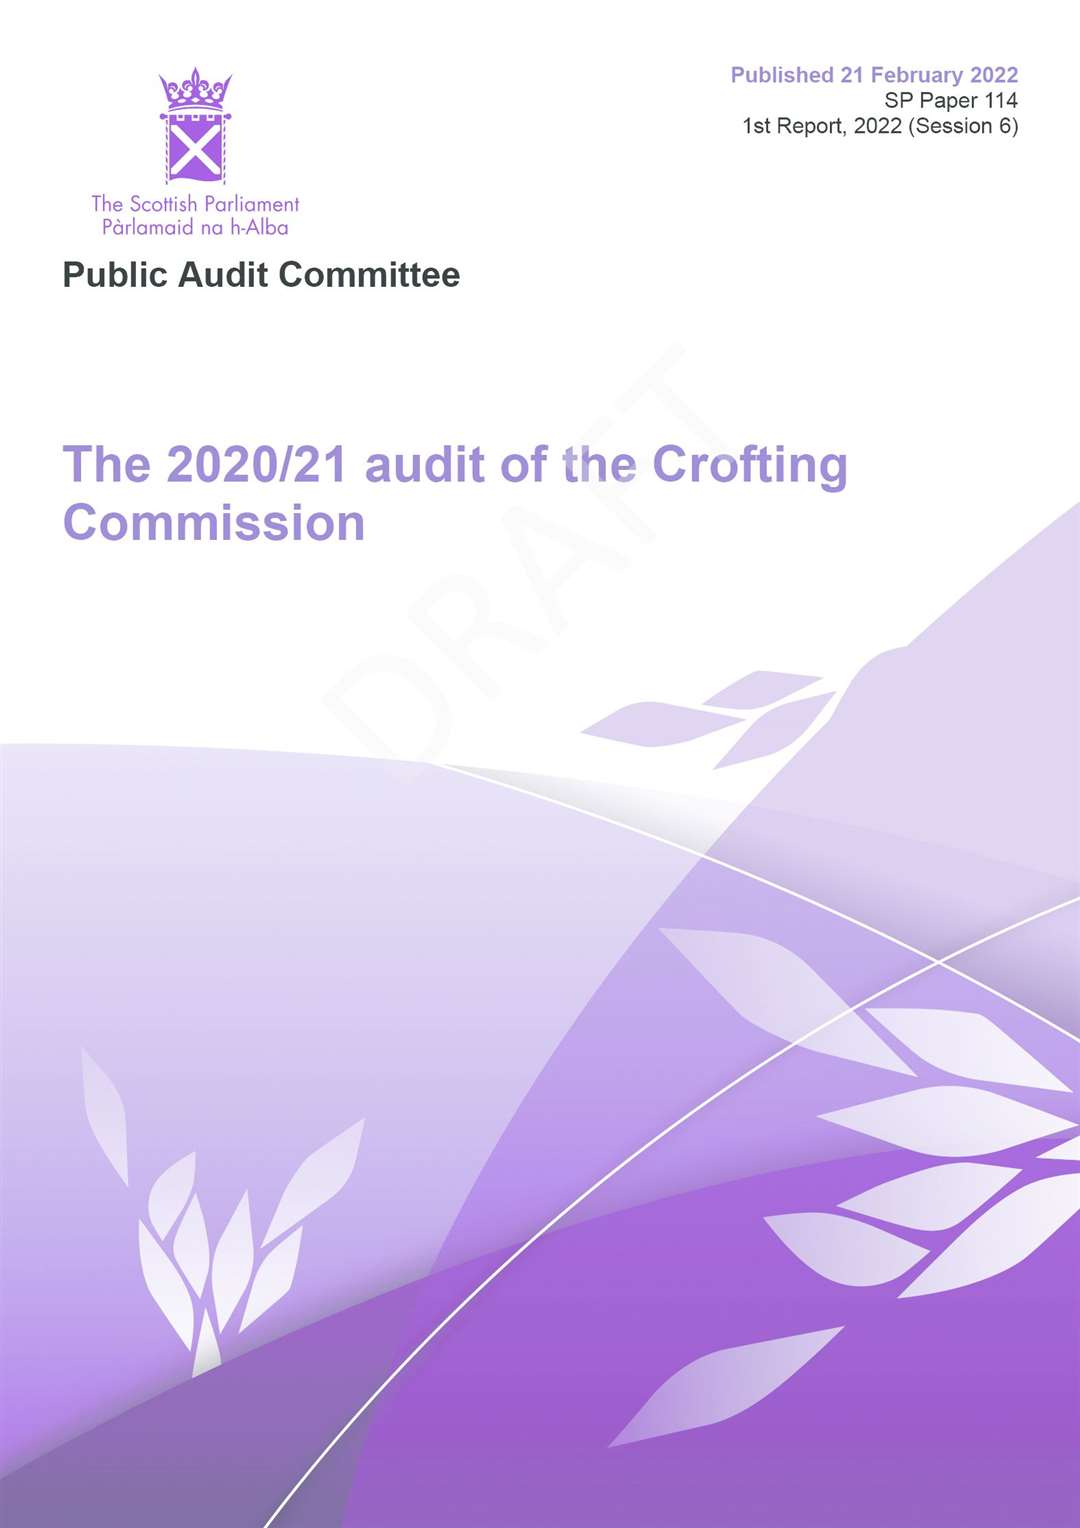 The Public Audit Committee reports to the Crofting Commission.